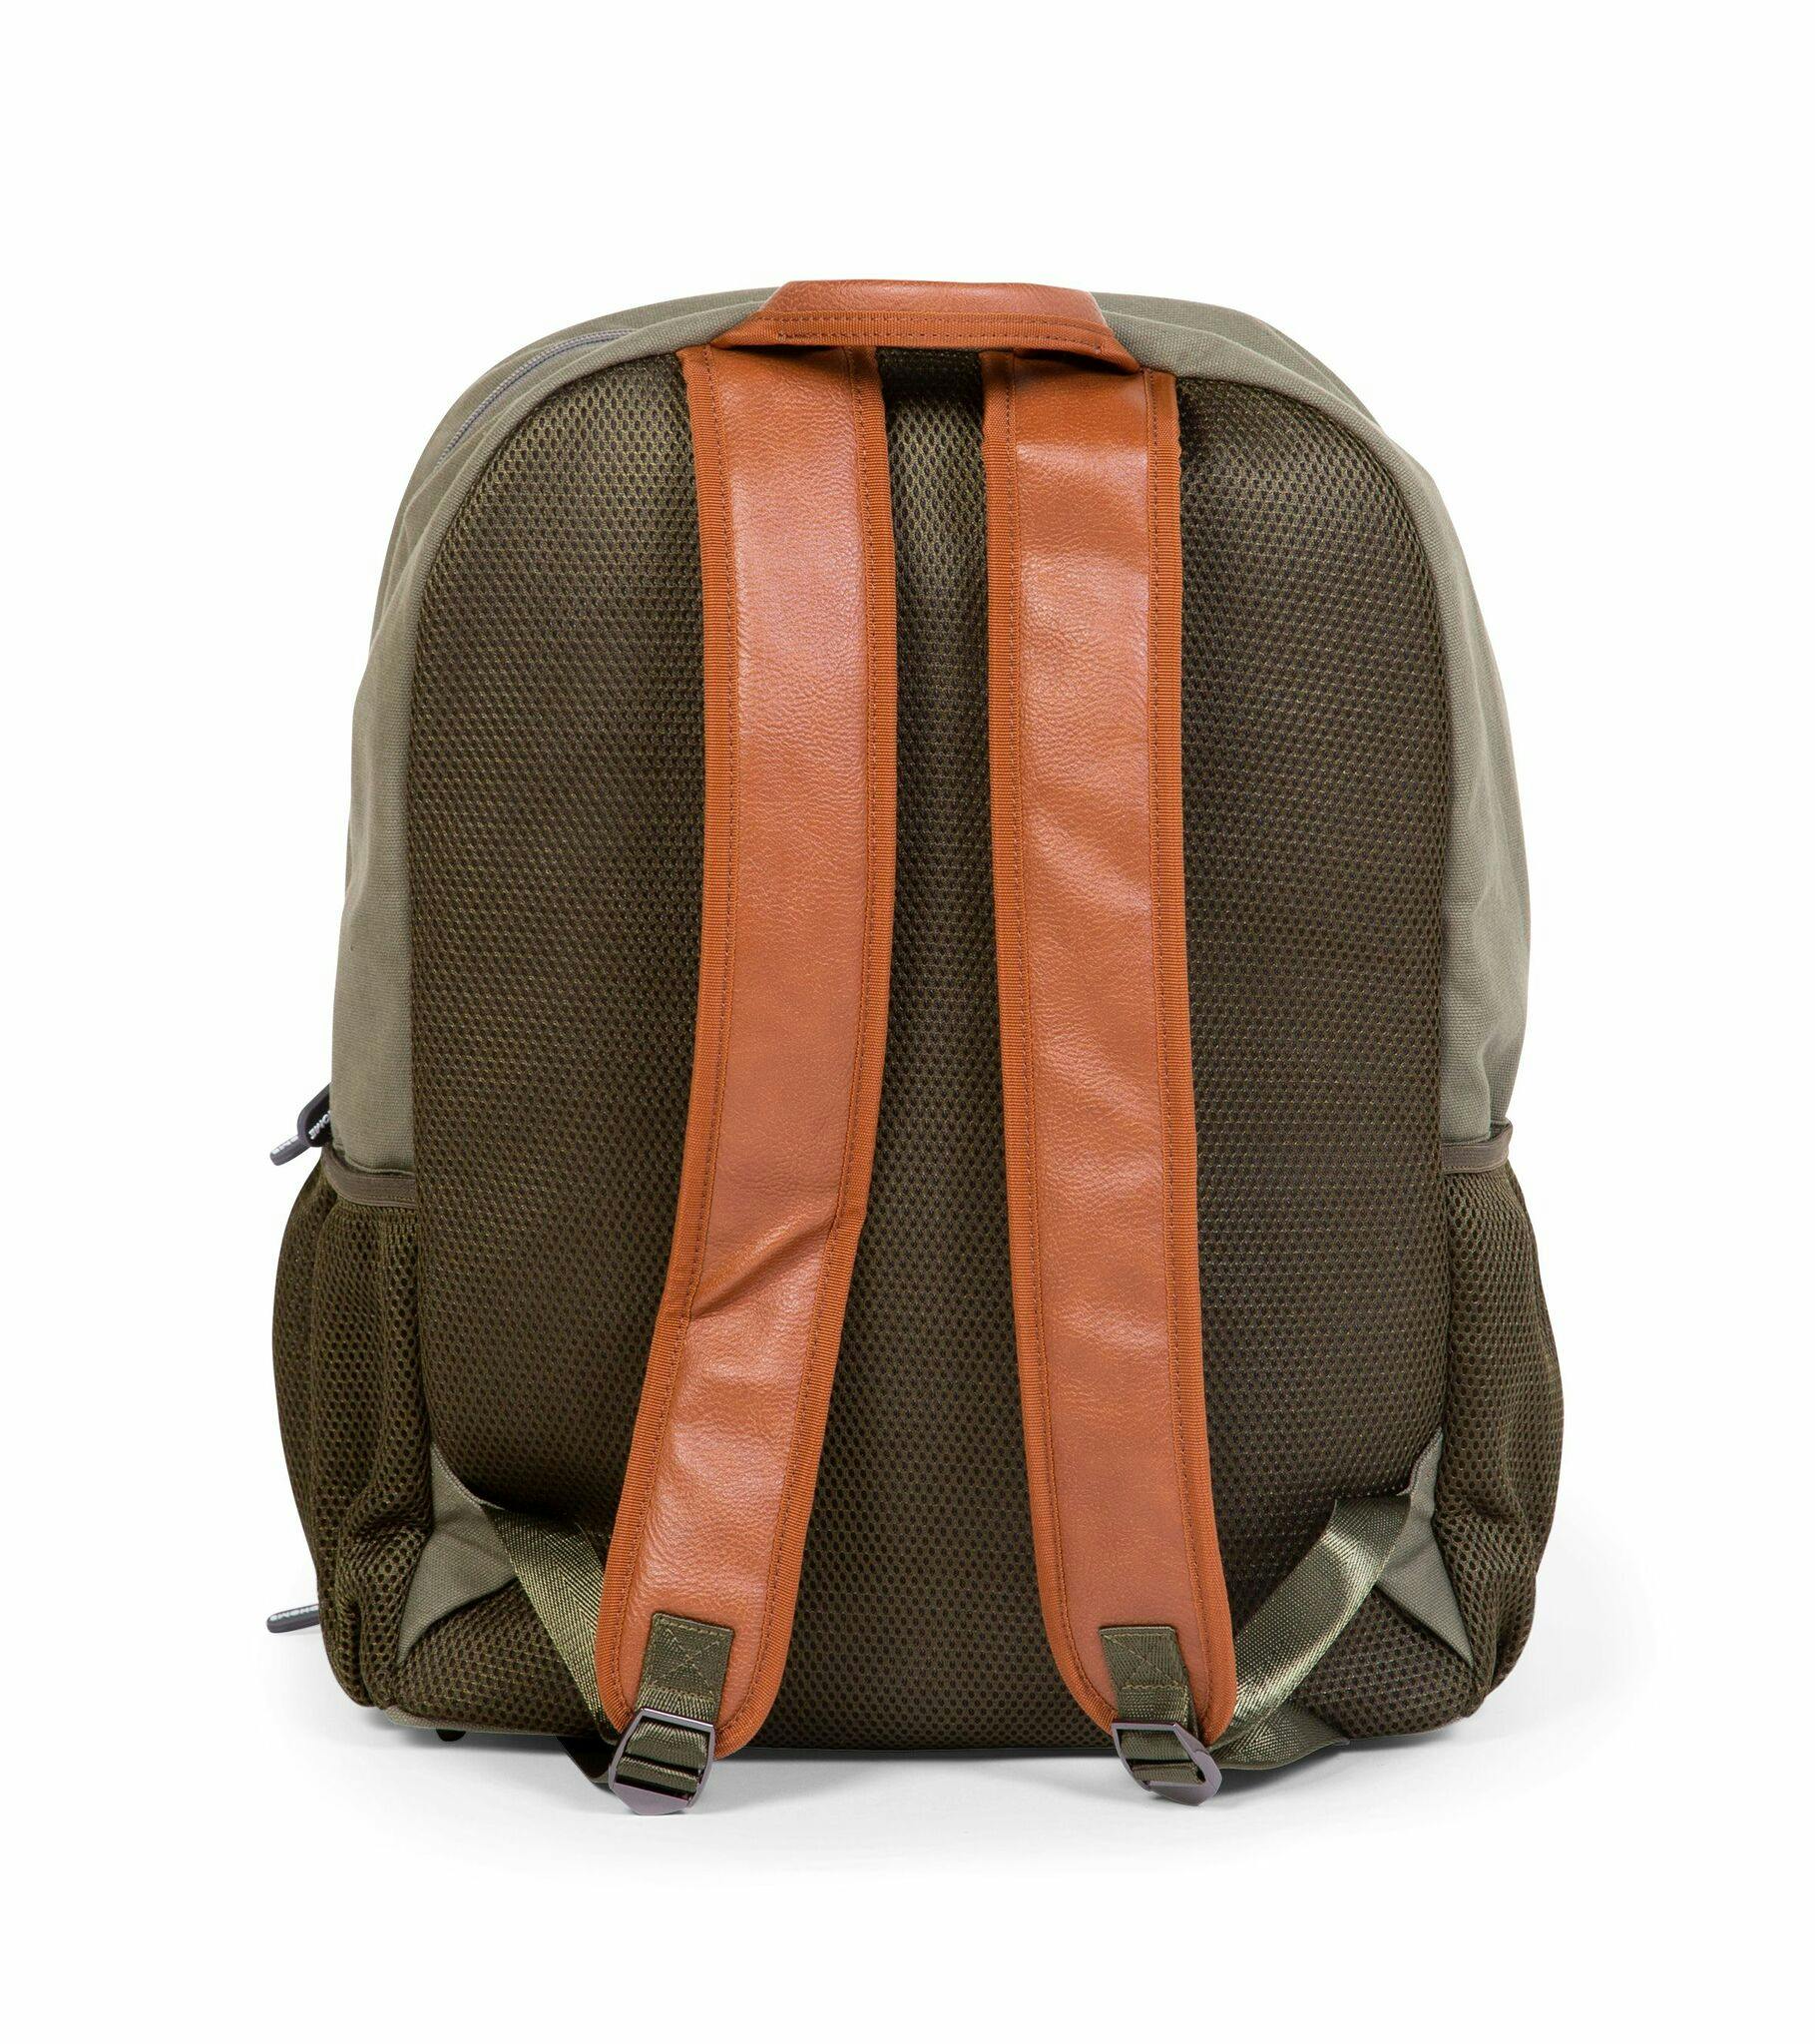 DADDY BAG CARE BACKPACK - CANVAS - KHAKI